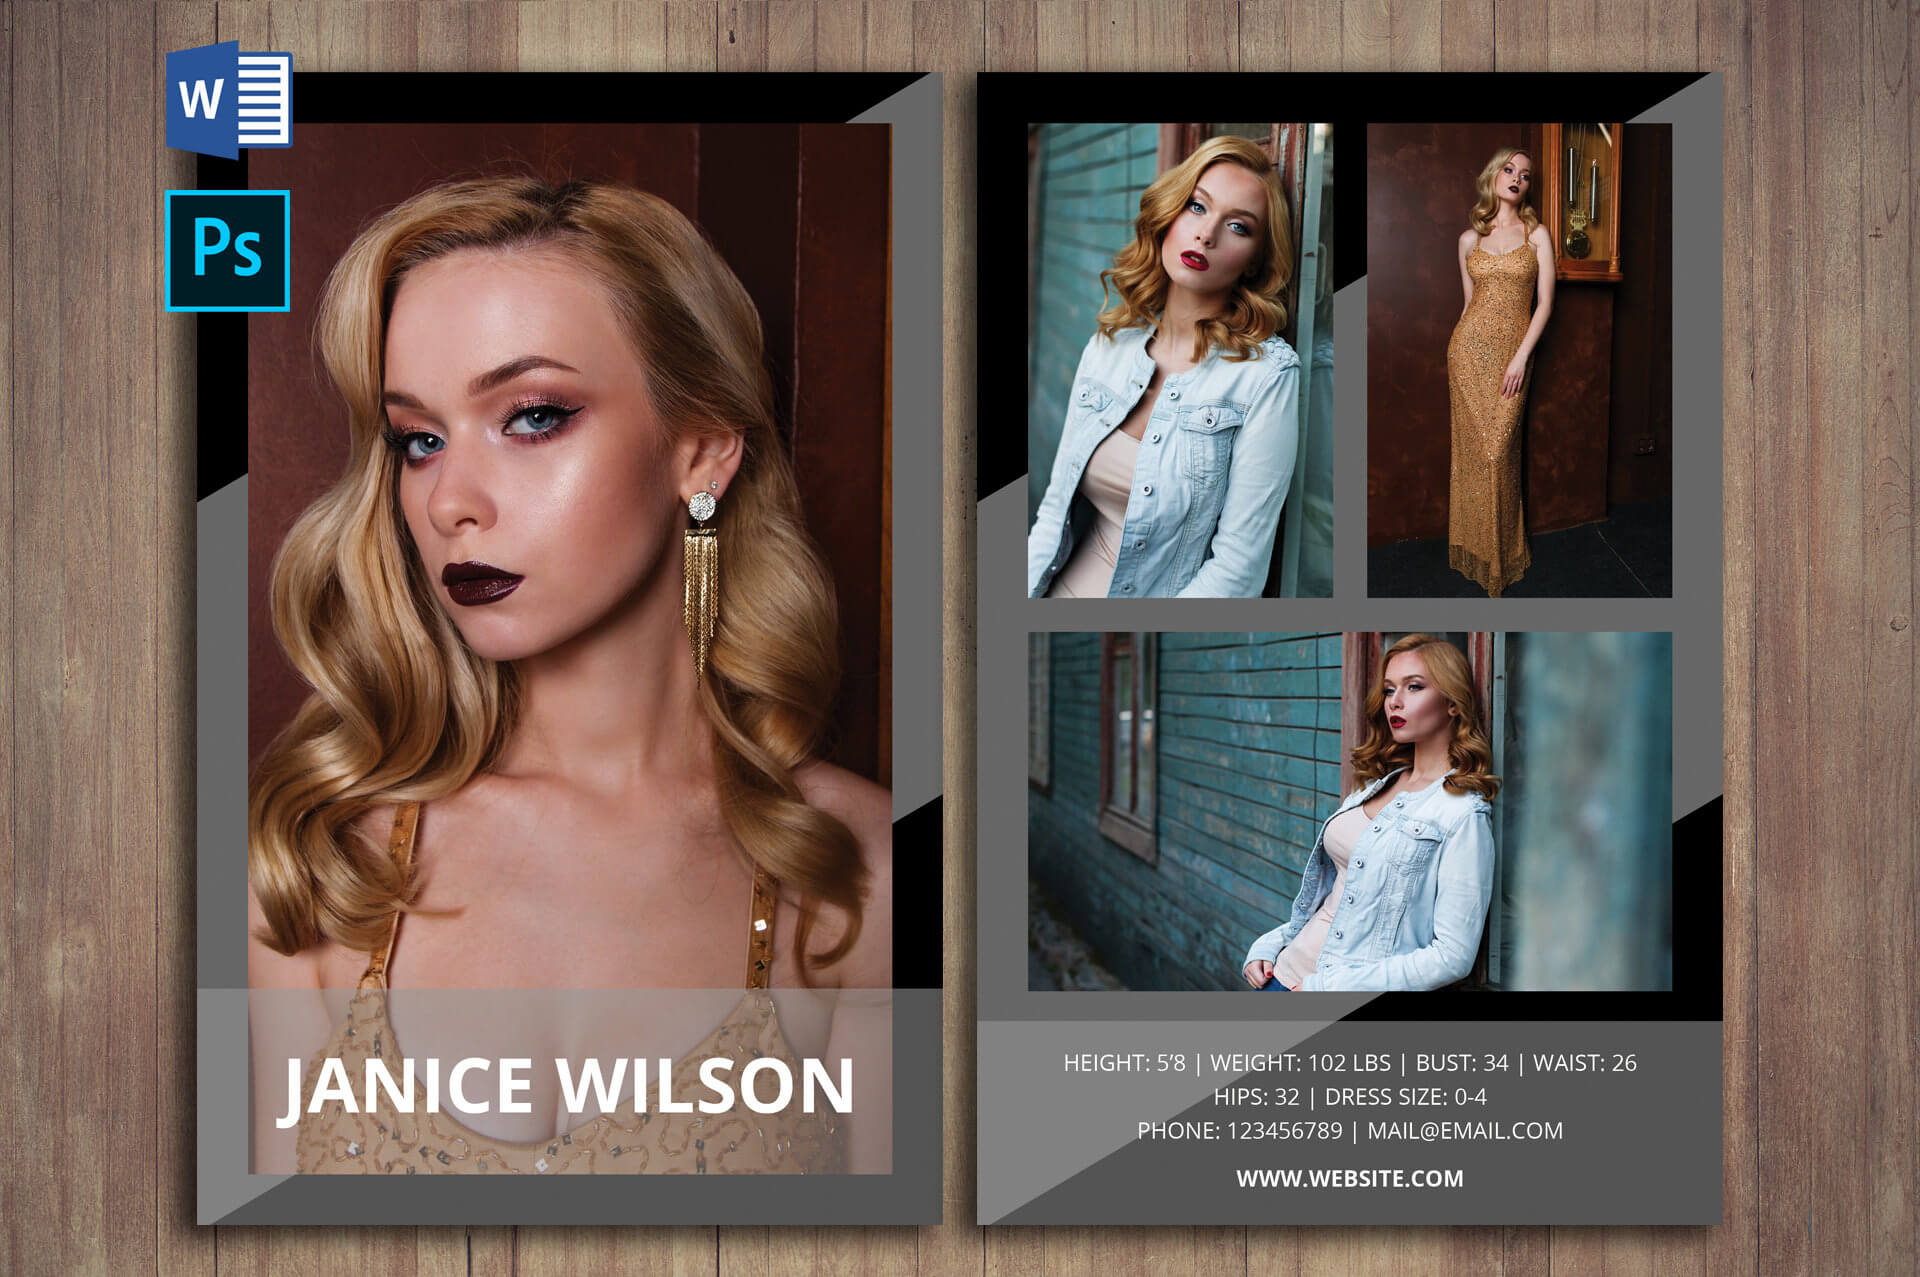 Modeling Comp Card Template, Word Template, Photoshop Template, Instant  Download, Docx Files, Psd Template, Professional Comp Card Template Regarding Comp Card Template Psd